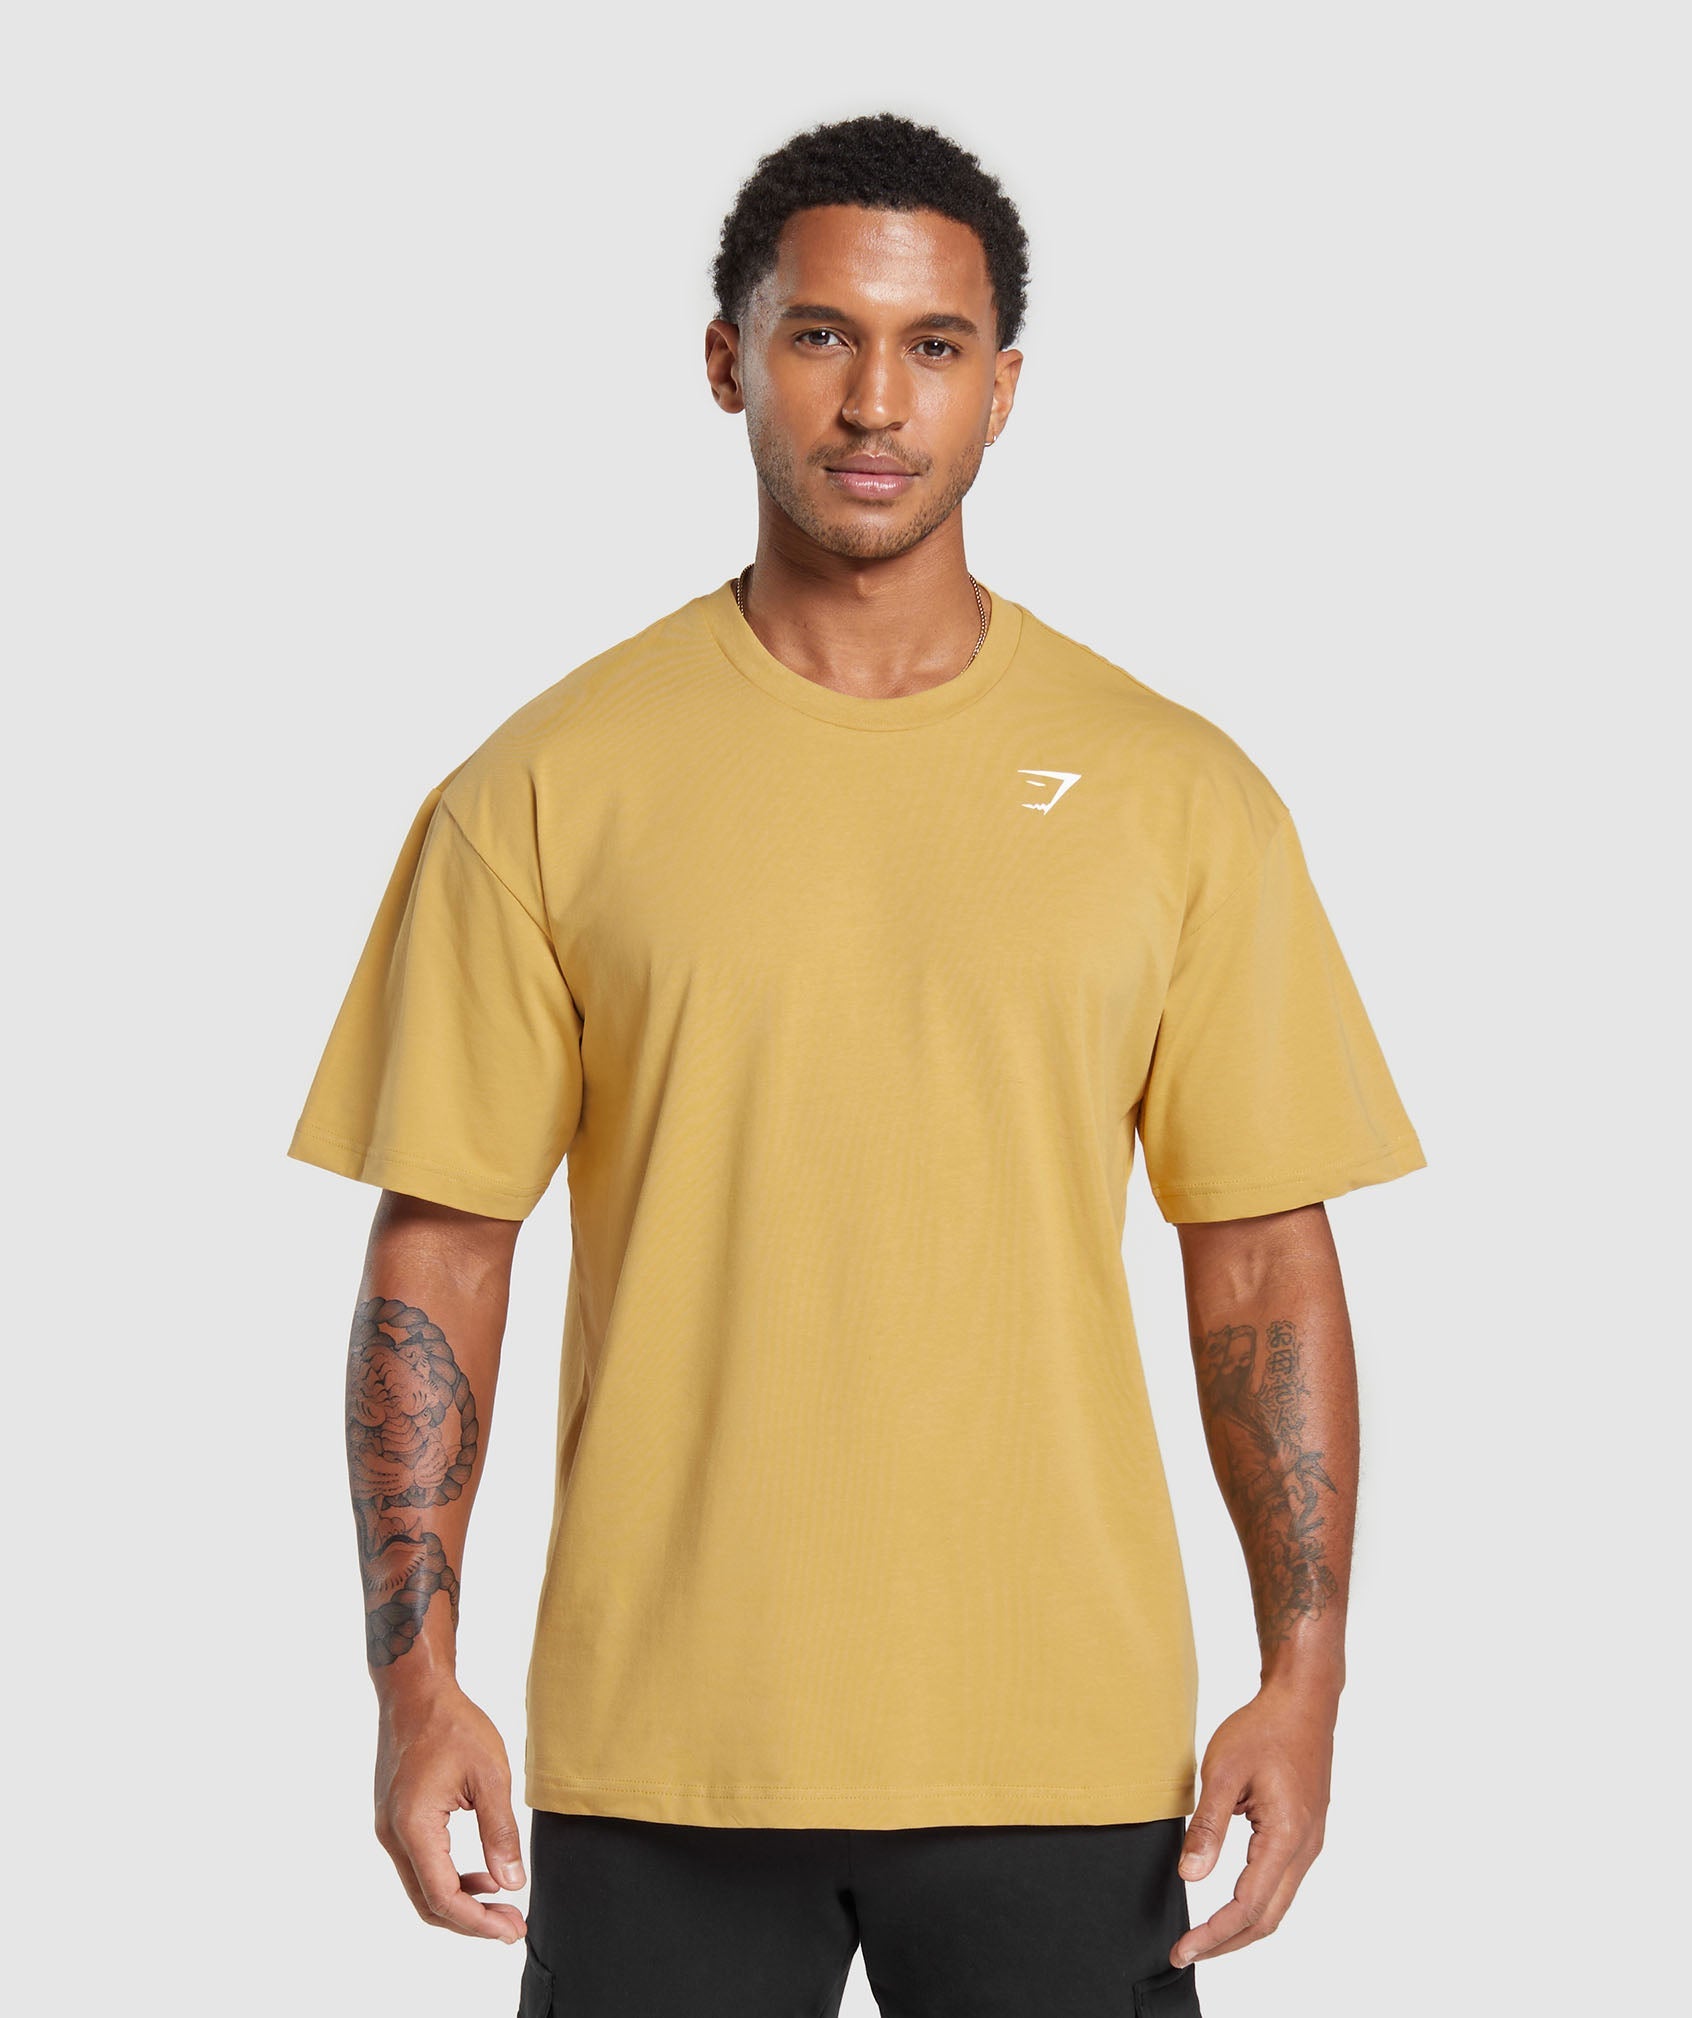 Essential Oversized T-Shirt in Rustic Yellow - view 1